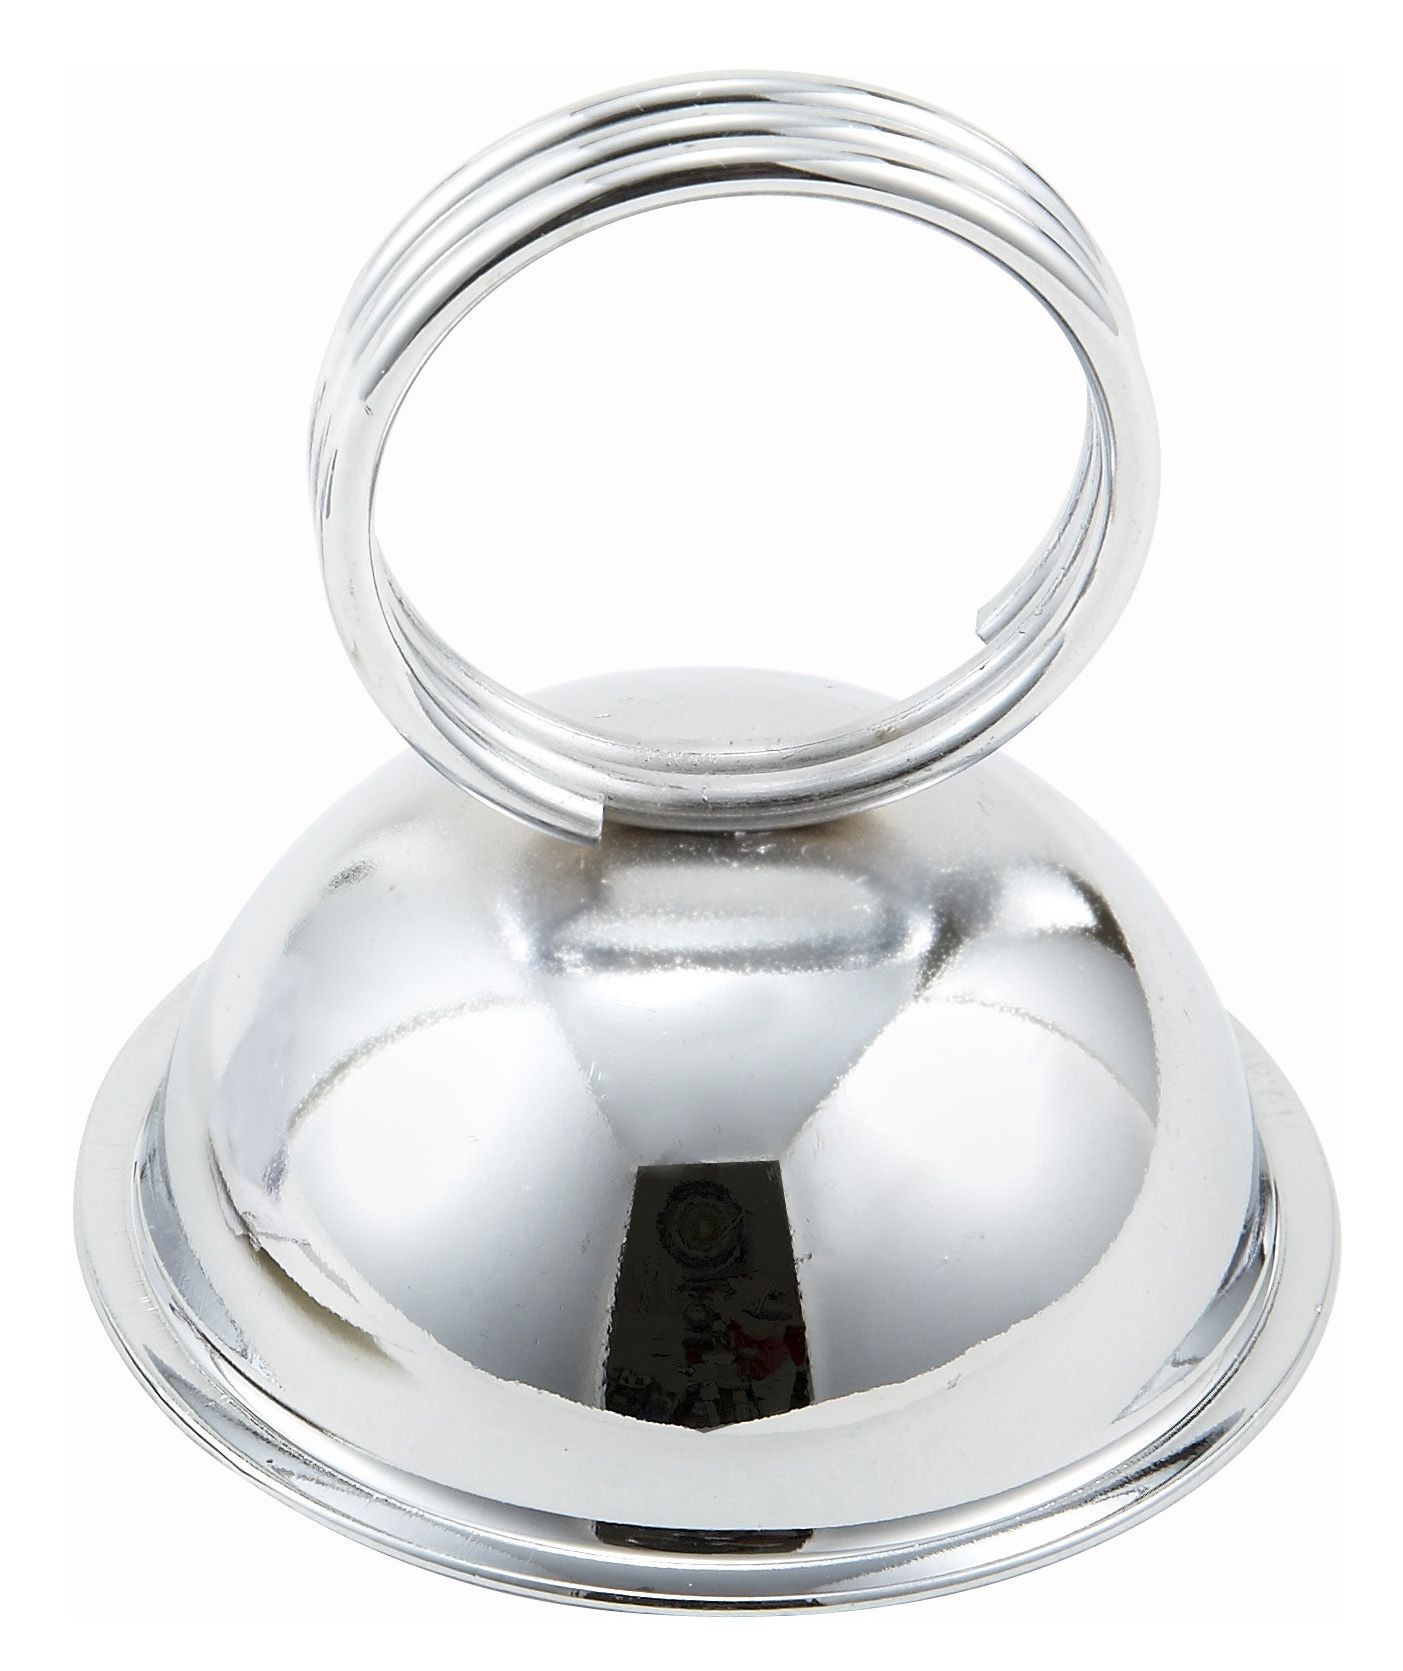 Winco MH-2 Stainless Steel Ring-Type Menu/Card Holder 2-1/2" x 2-1/2"